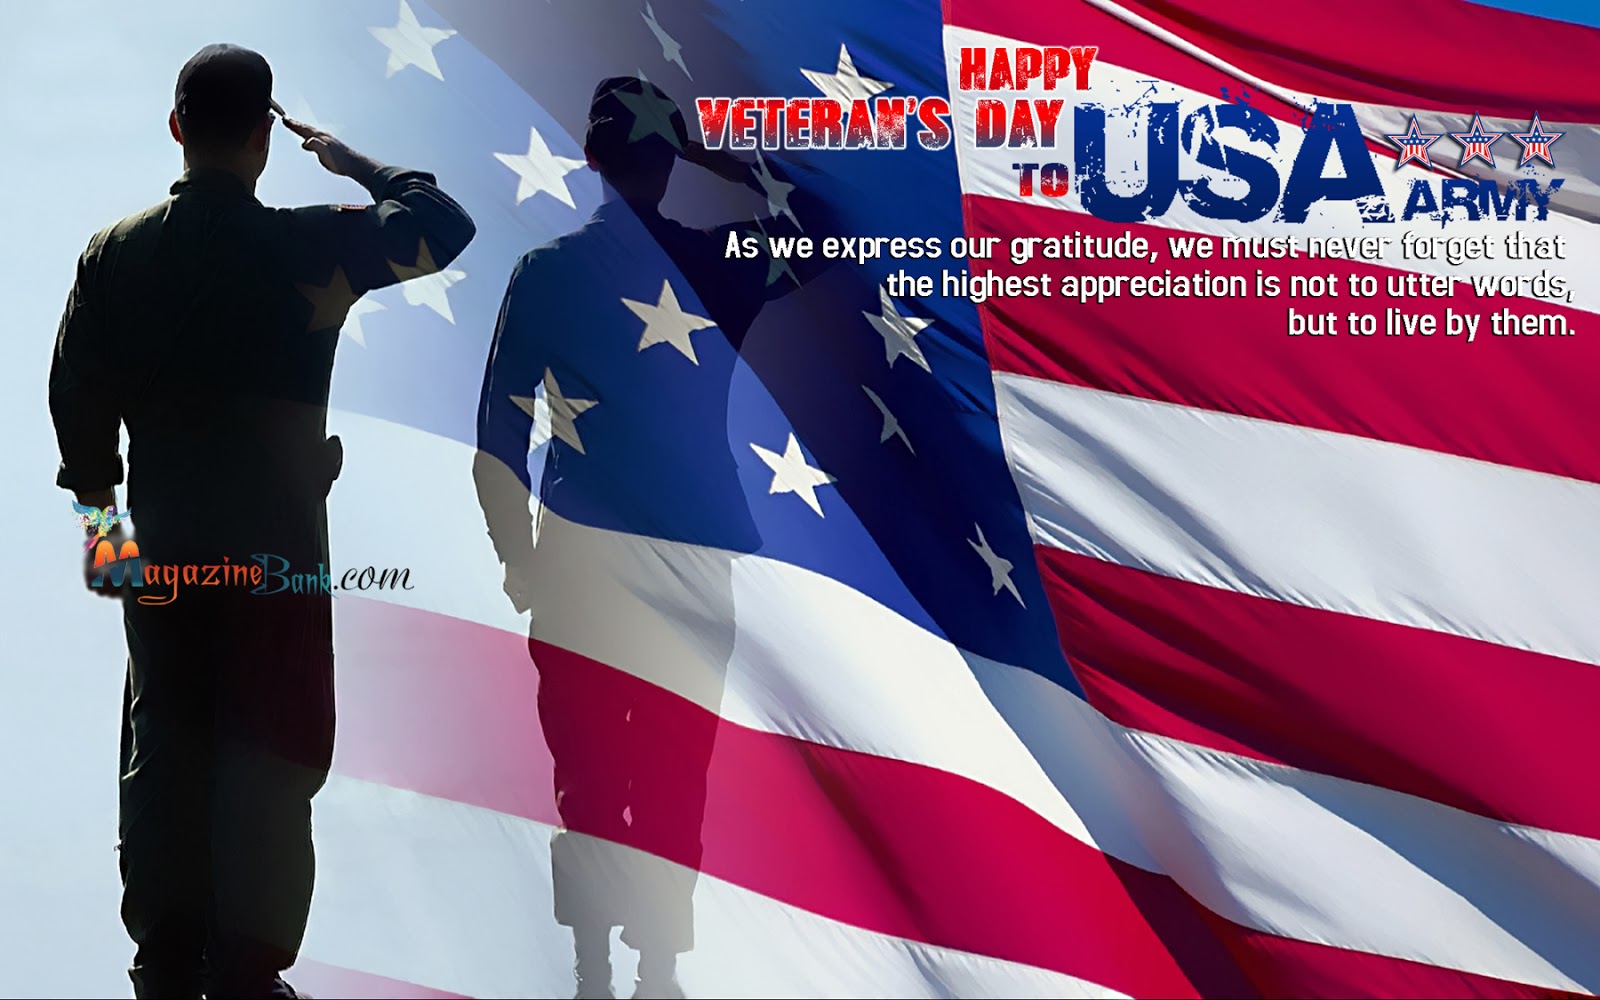 honor the brave war heroes with happy veterans day quotes